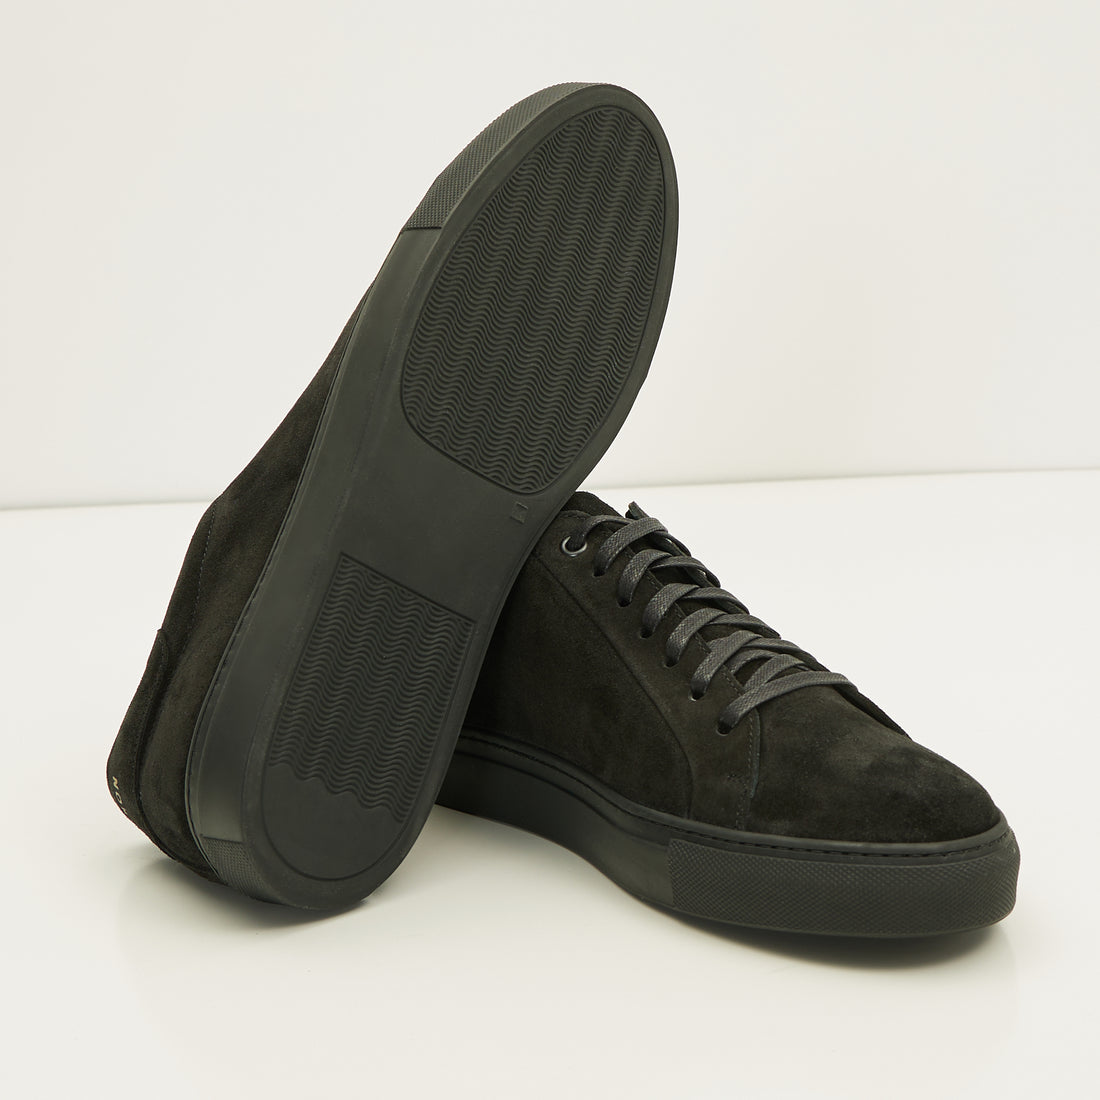 Suede Leather Court Sneakers  - Black Suede